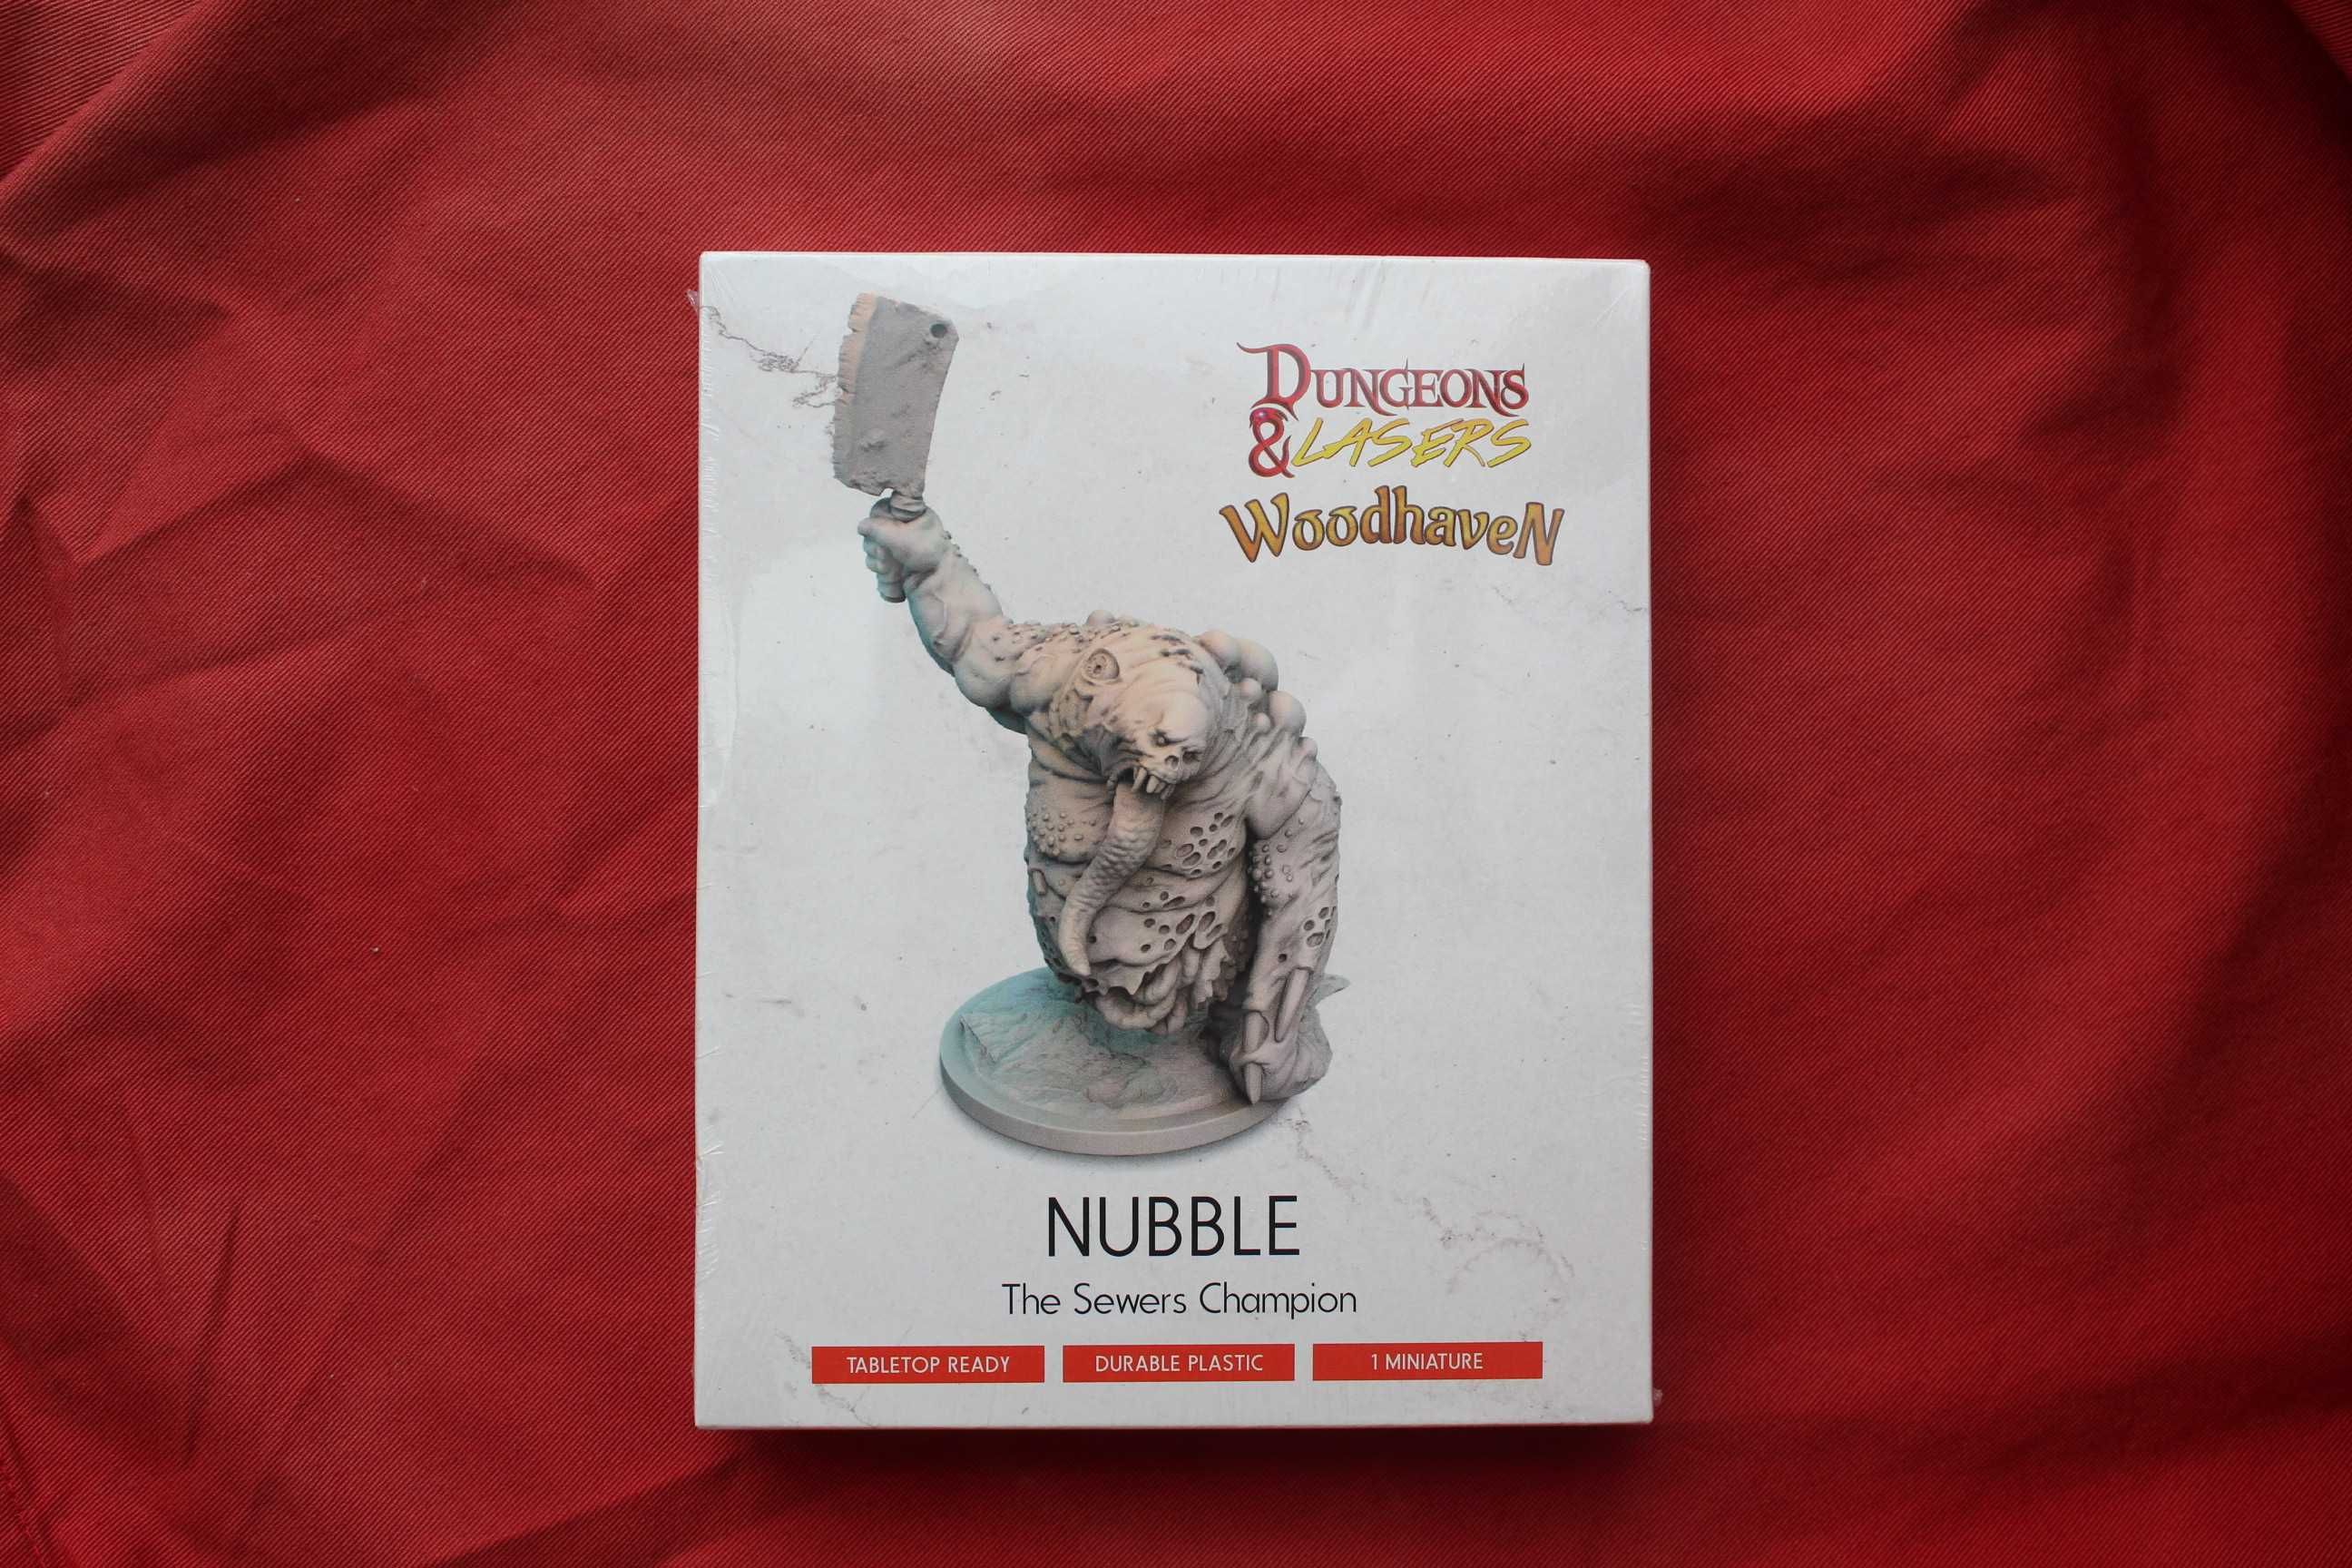 Nubble Dungeons And Lasers Archon STUDIO RPG WoodhaveN